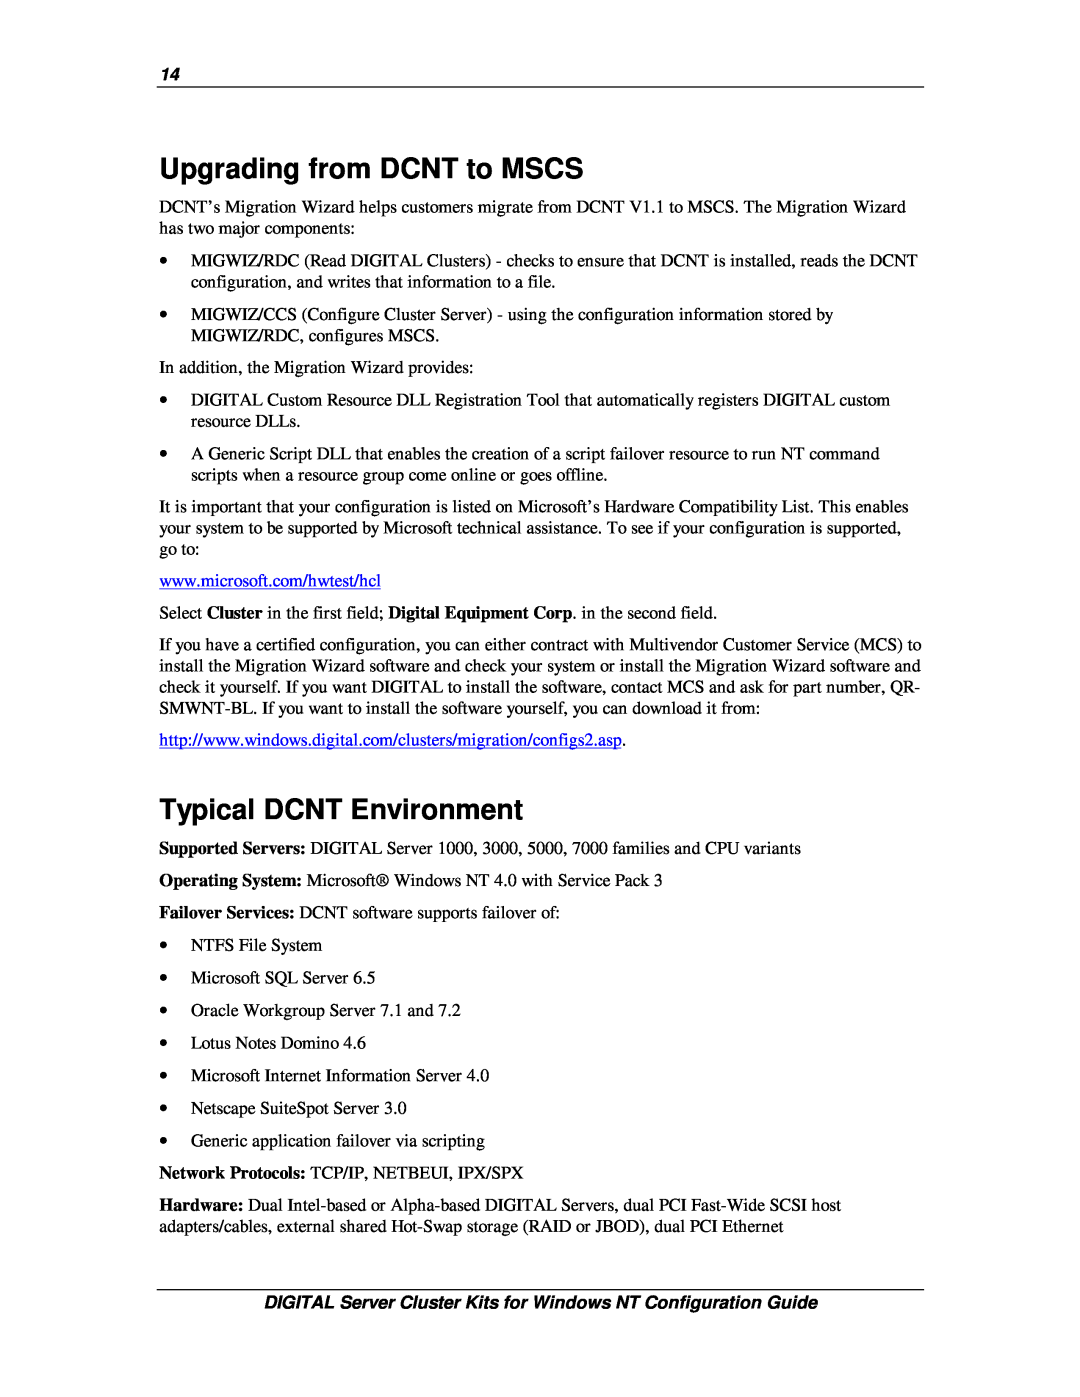 Compaq DIGITAL Server Cluster Kits for Windows NT manual Upgrading from DCNT to MSCS, Typical DCNT Environment 